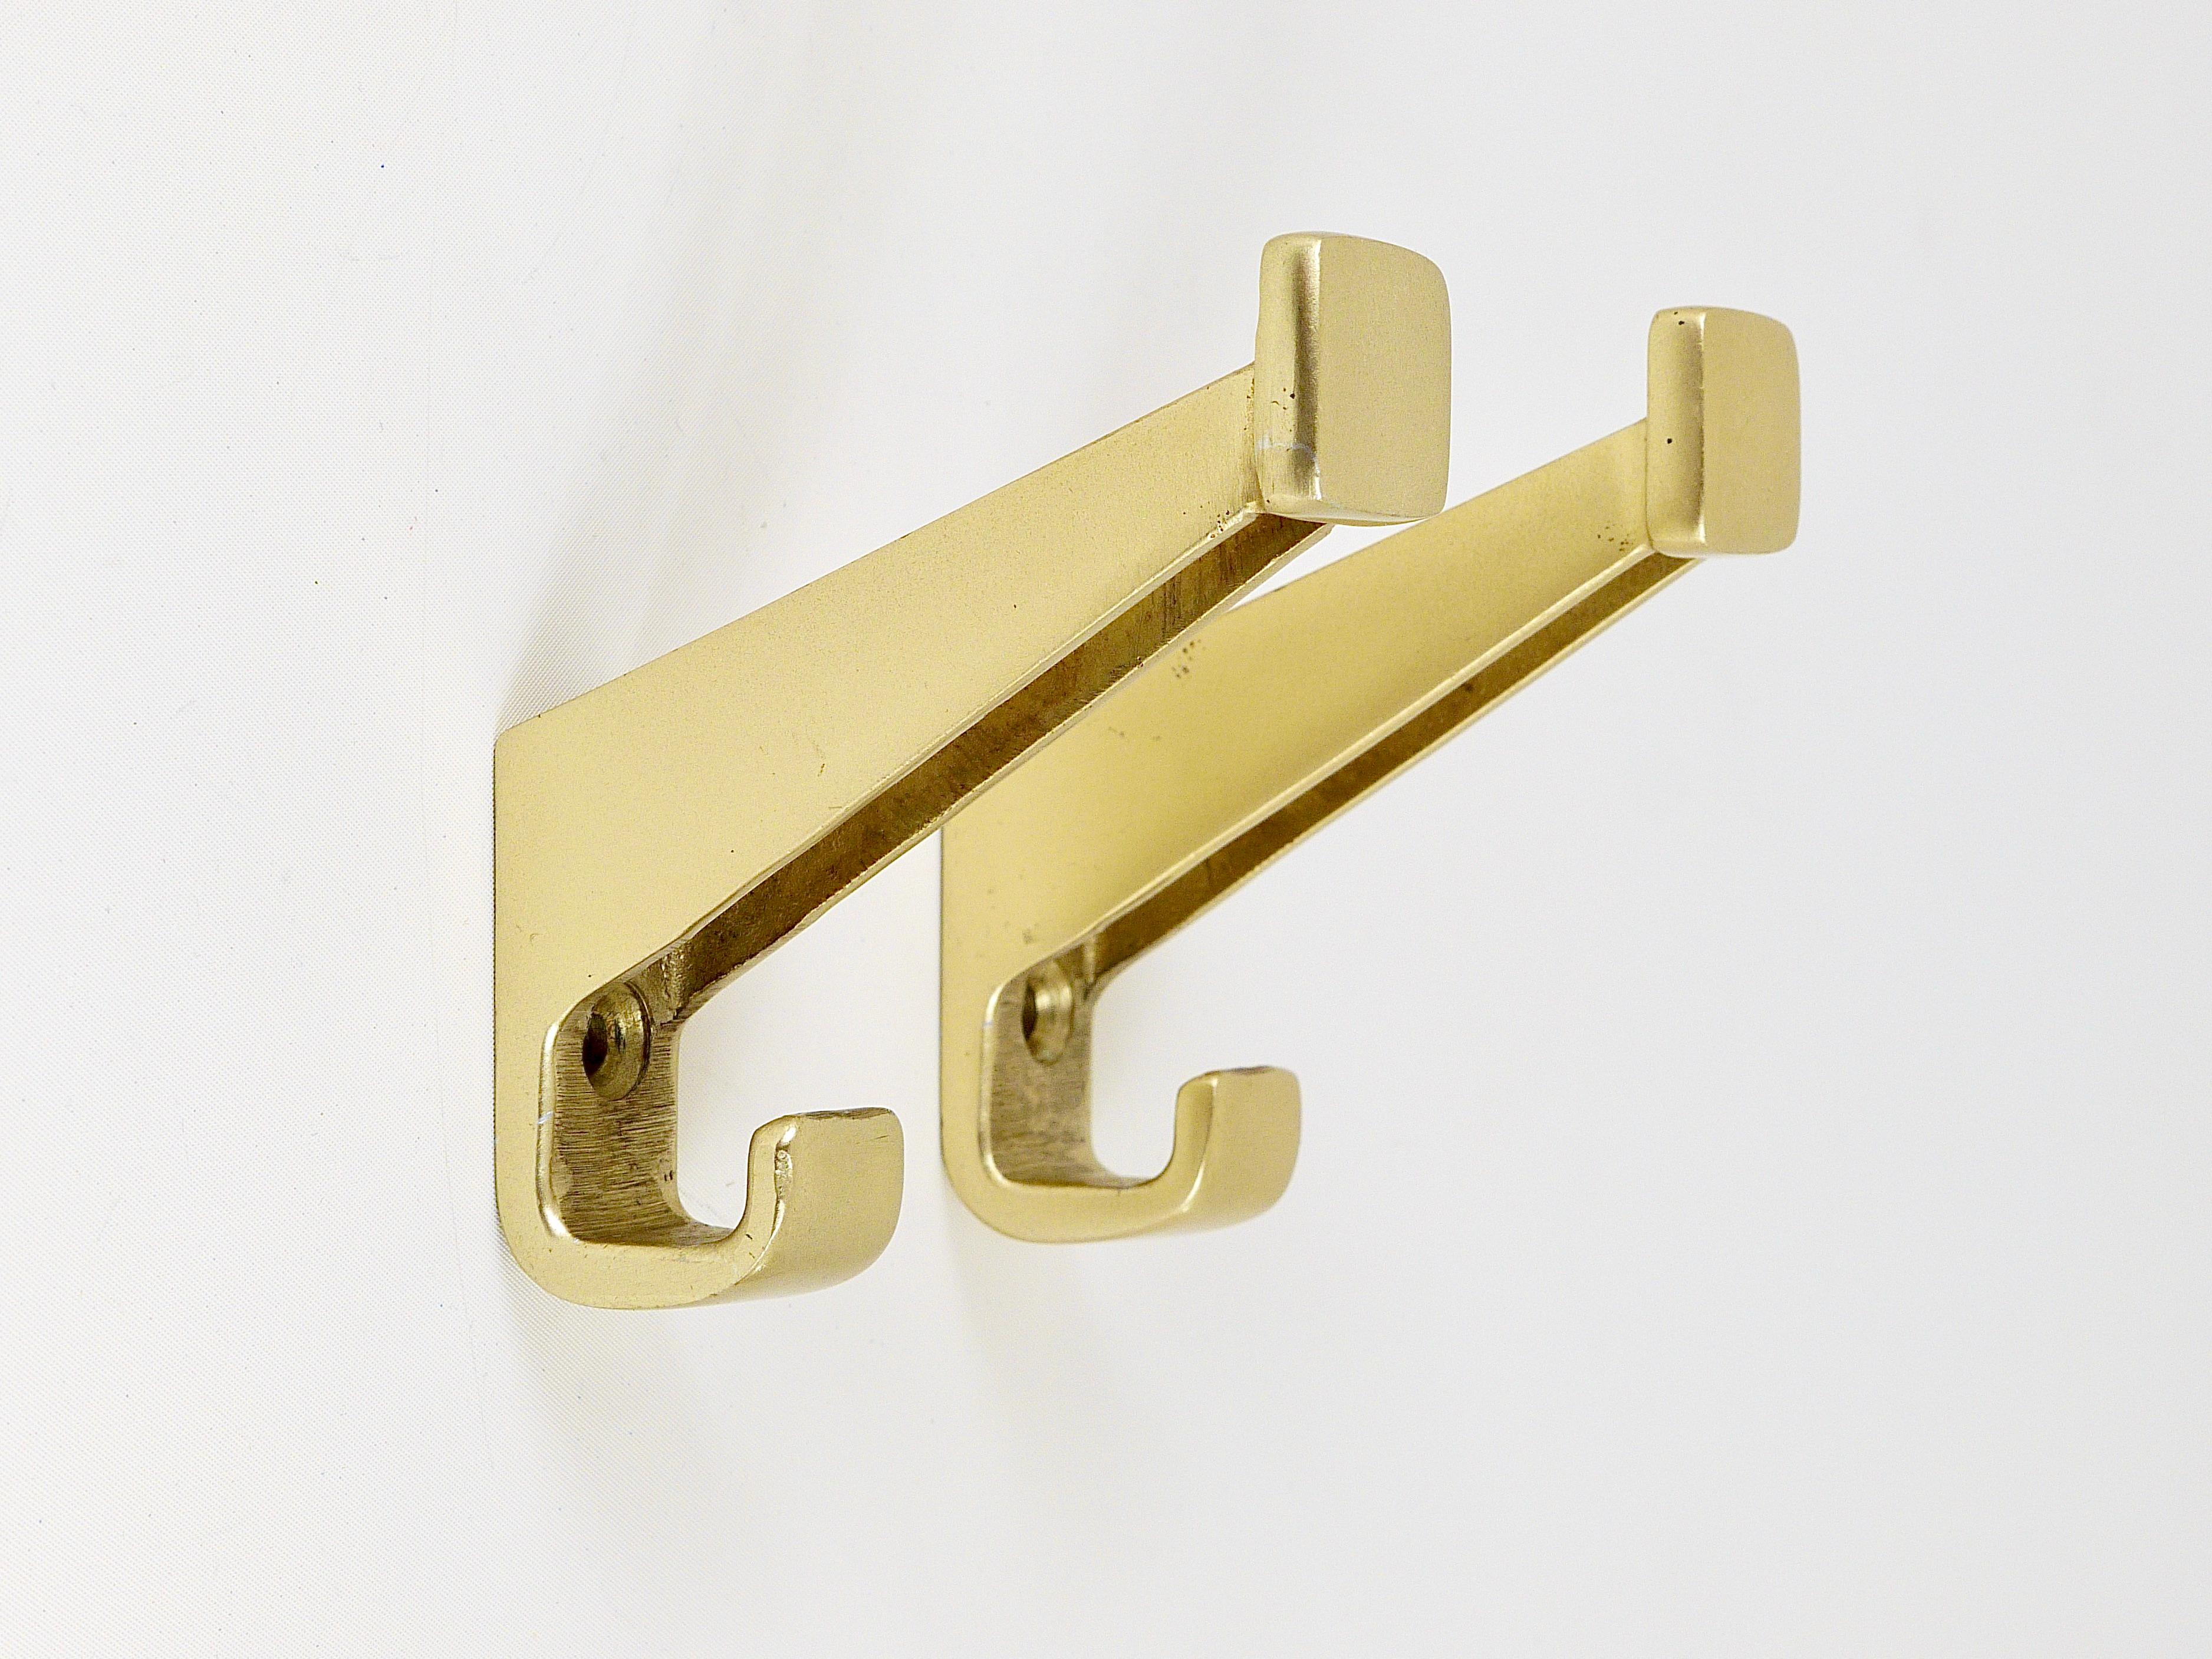 Two beautiful coat wall hooks from the 1930s, designed by Josef Hoffmann and Oswald Haerdtl for the Austrian Federal Railways. Made of golden anodized aluminum, in very good original condition with marginal wear.